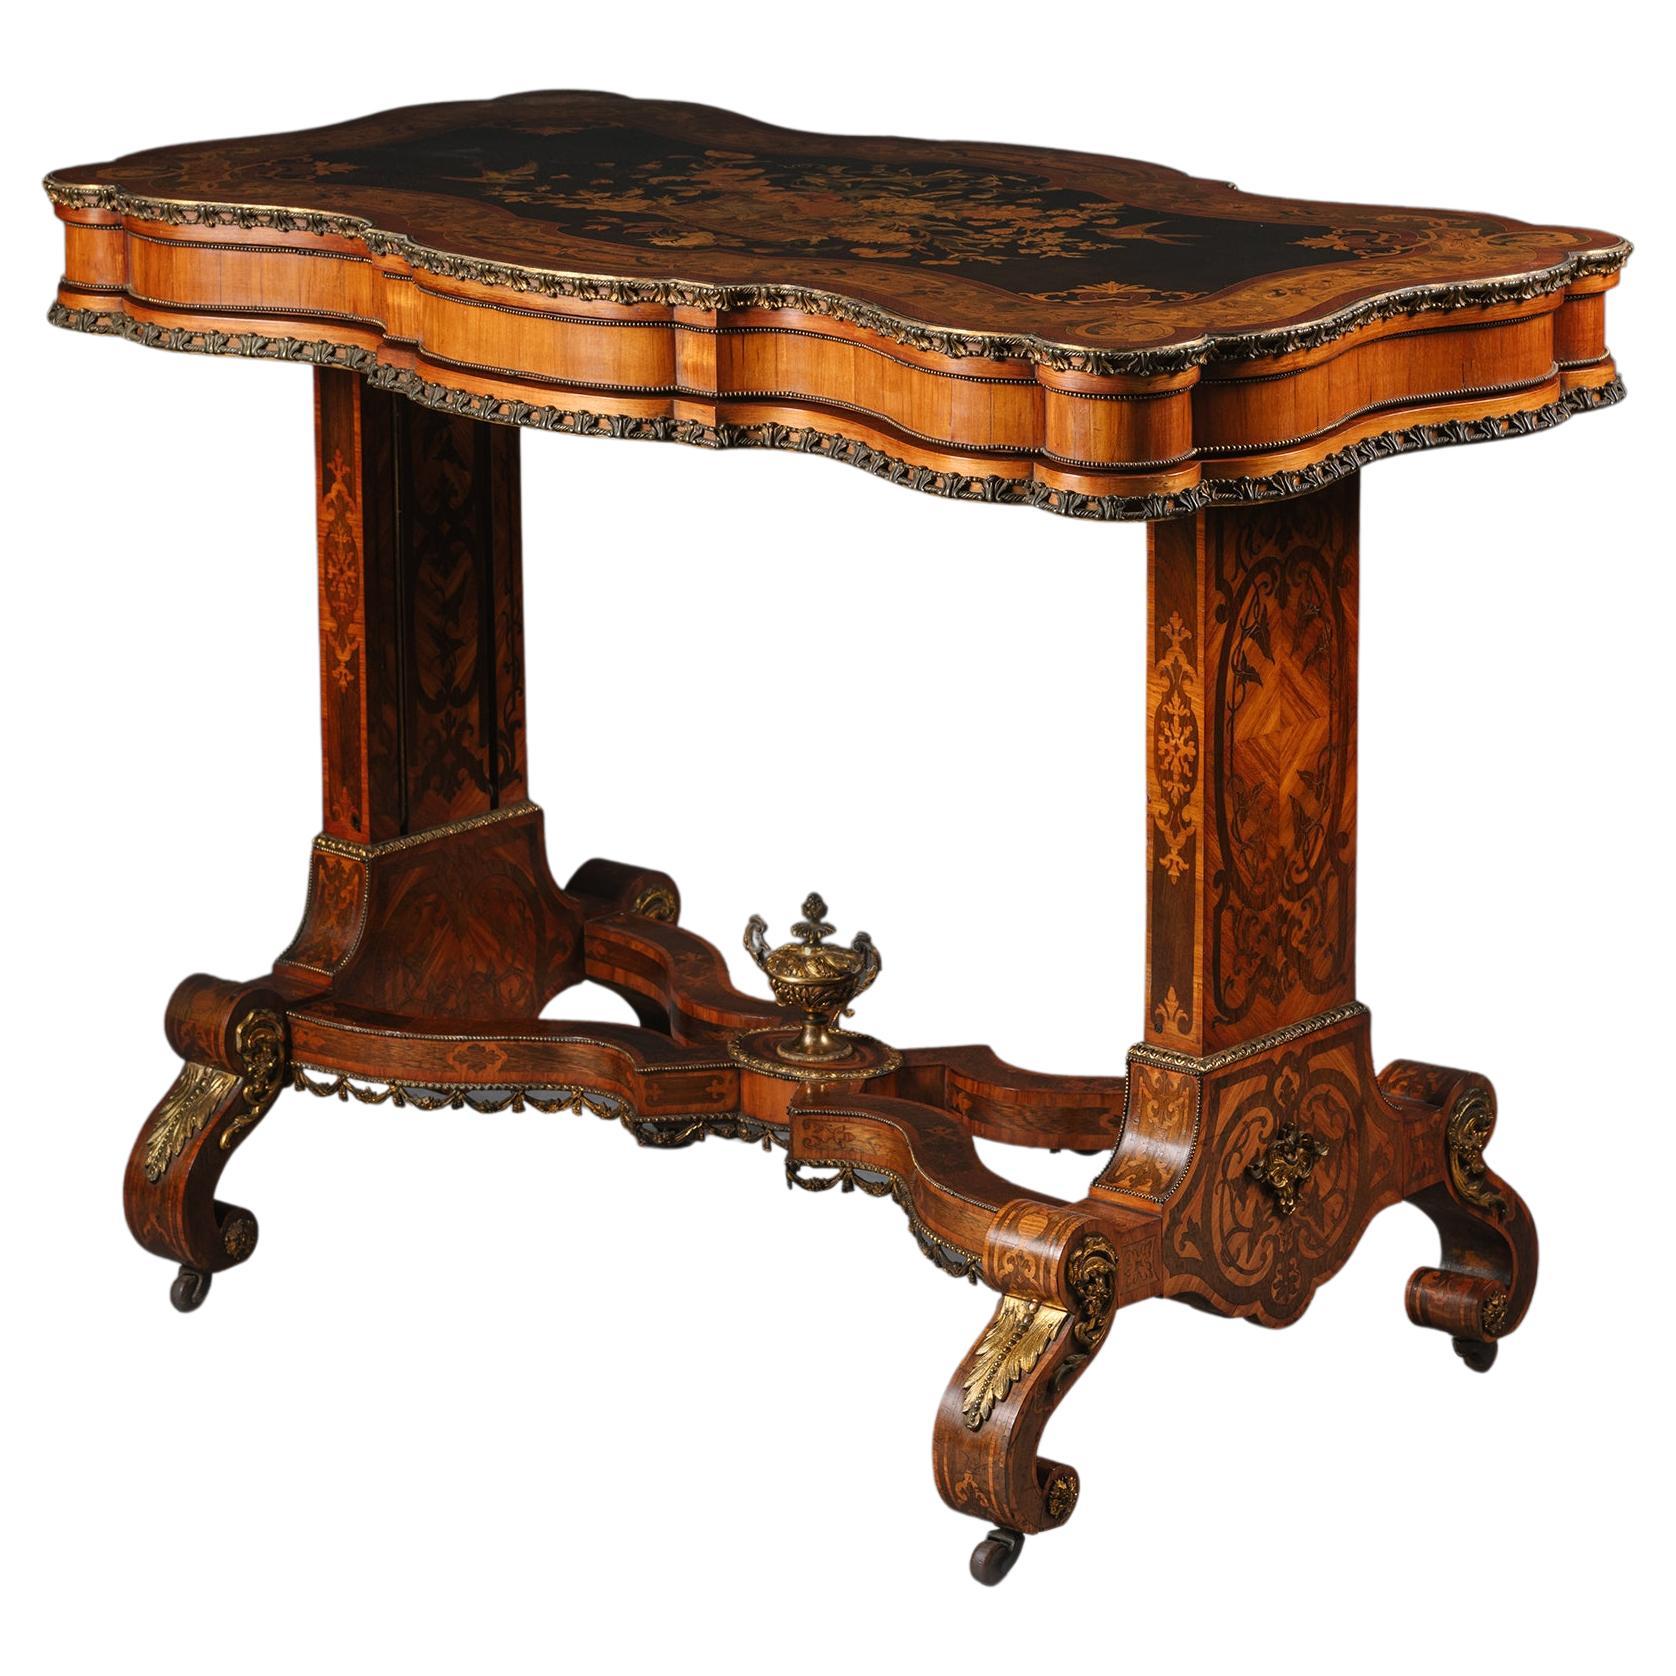 Rare and Unusual Victorian Gilt-Bronze and Marquetry Metamorphic Table